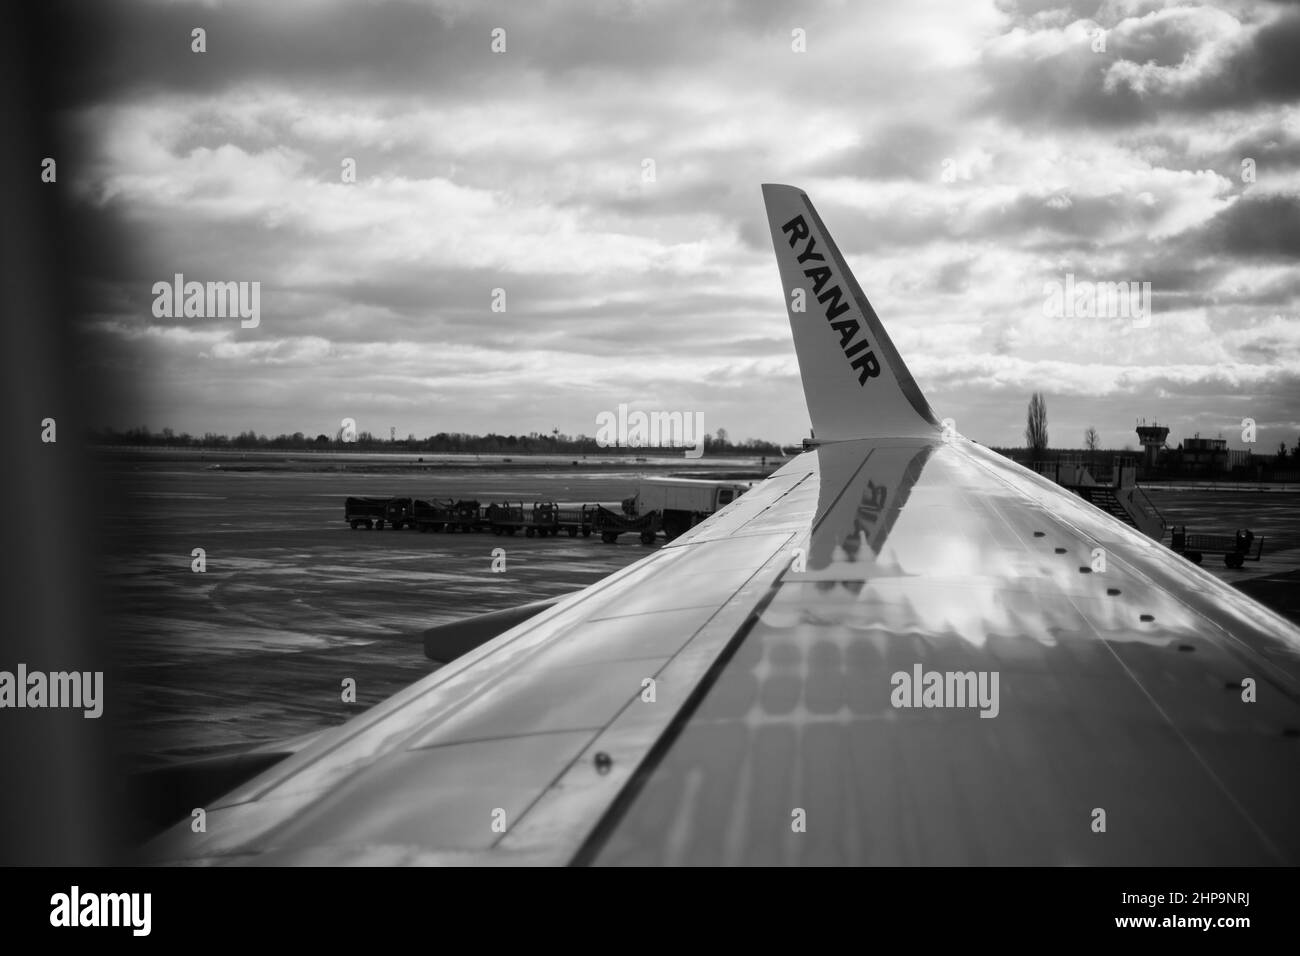 KIEV, UKRAINE - OCTOBER 11, 2022: The wing of the aircraft with the inscription Ryanair in the air autdoor Stock Photo